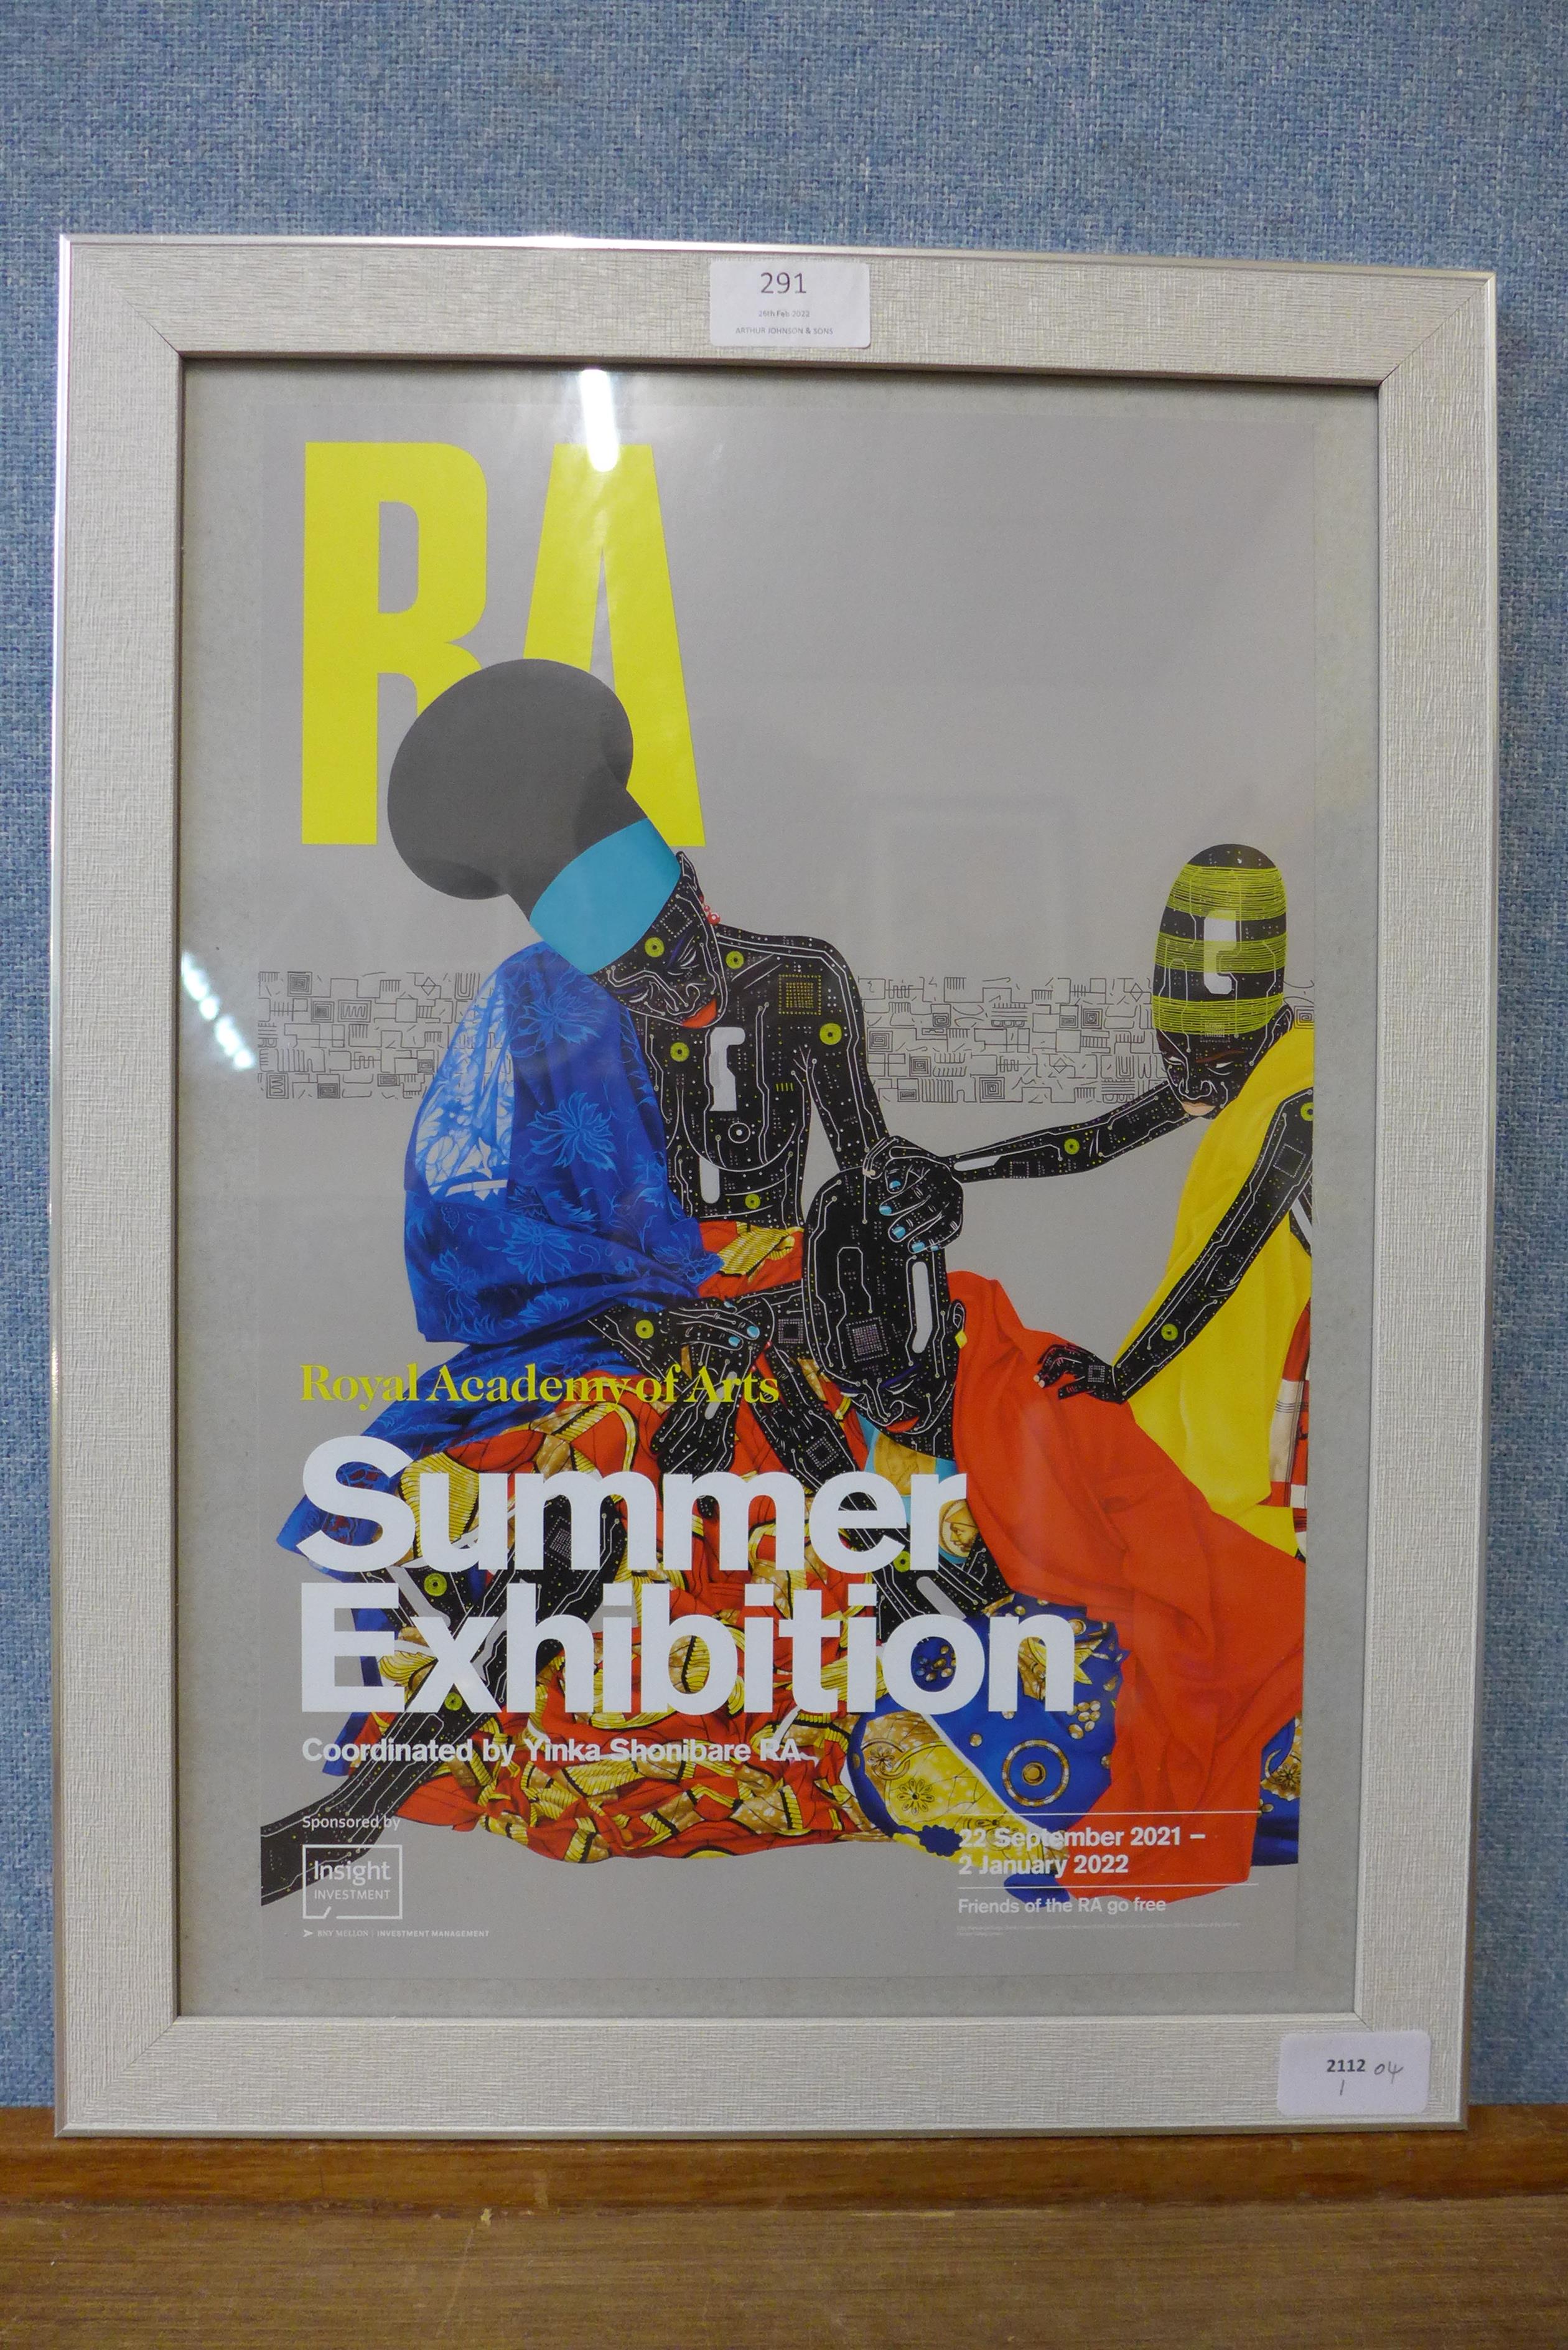 A Royal Academy mini-poster, Summer Exhibition, framed